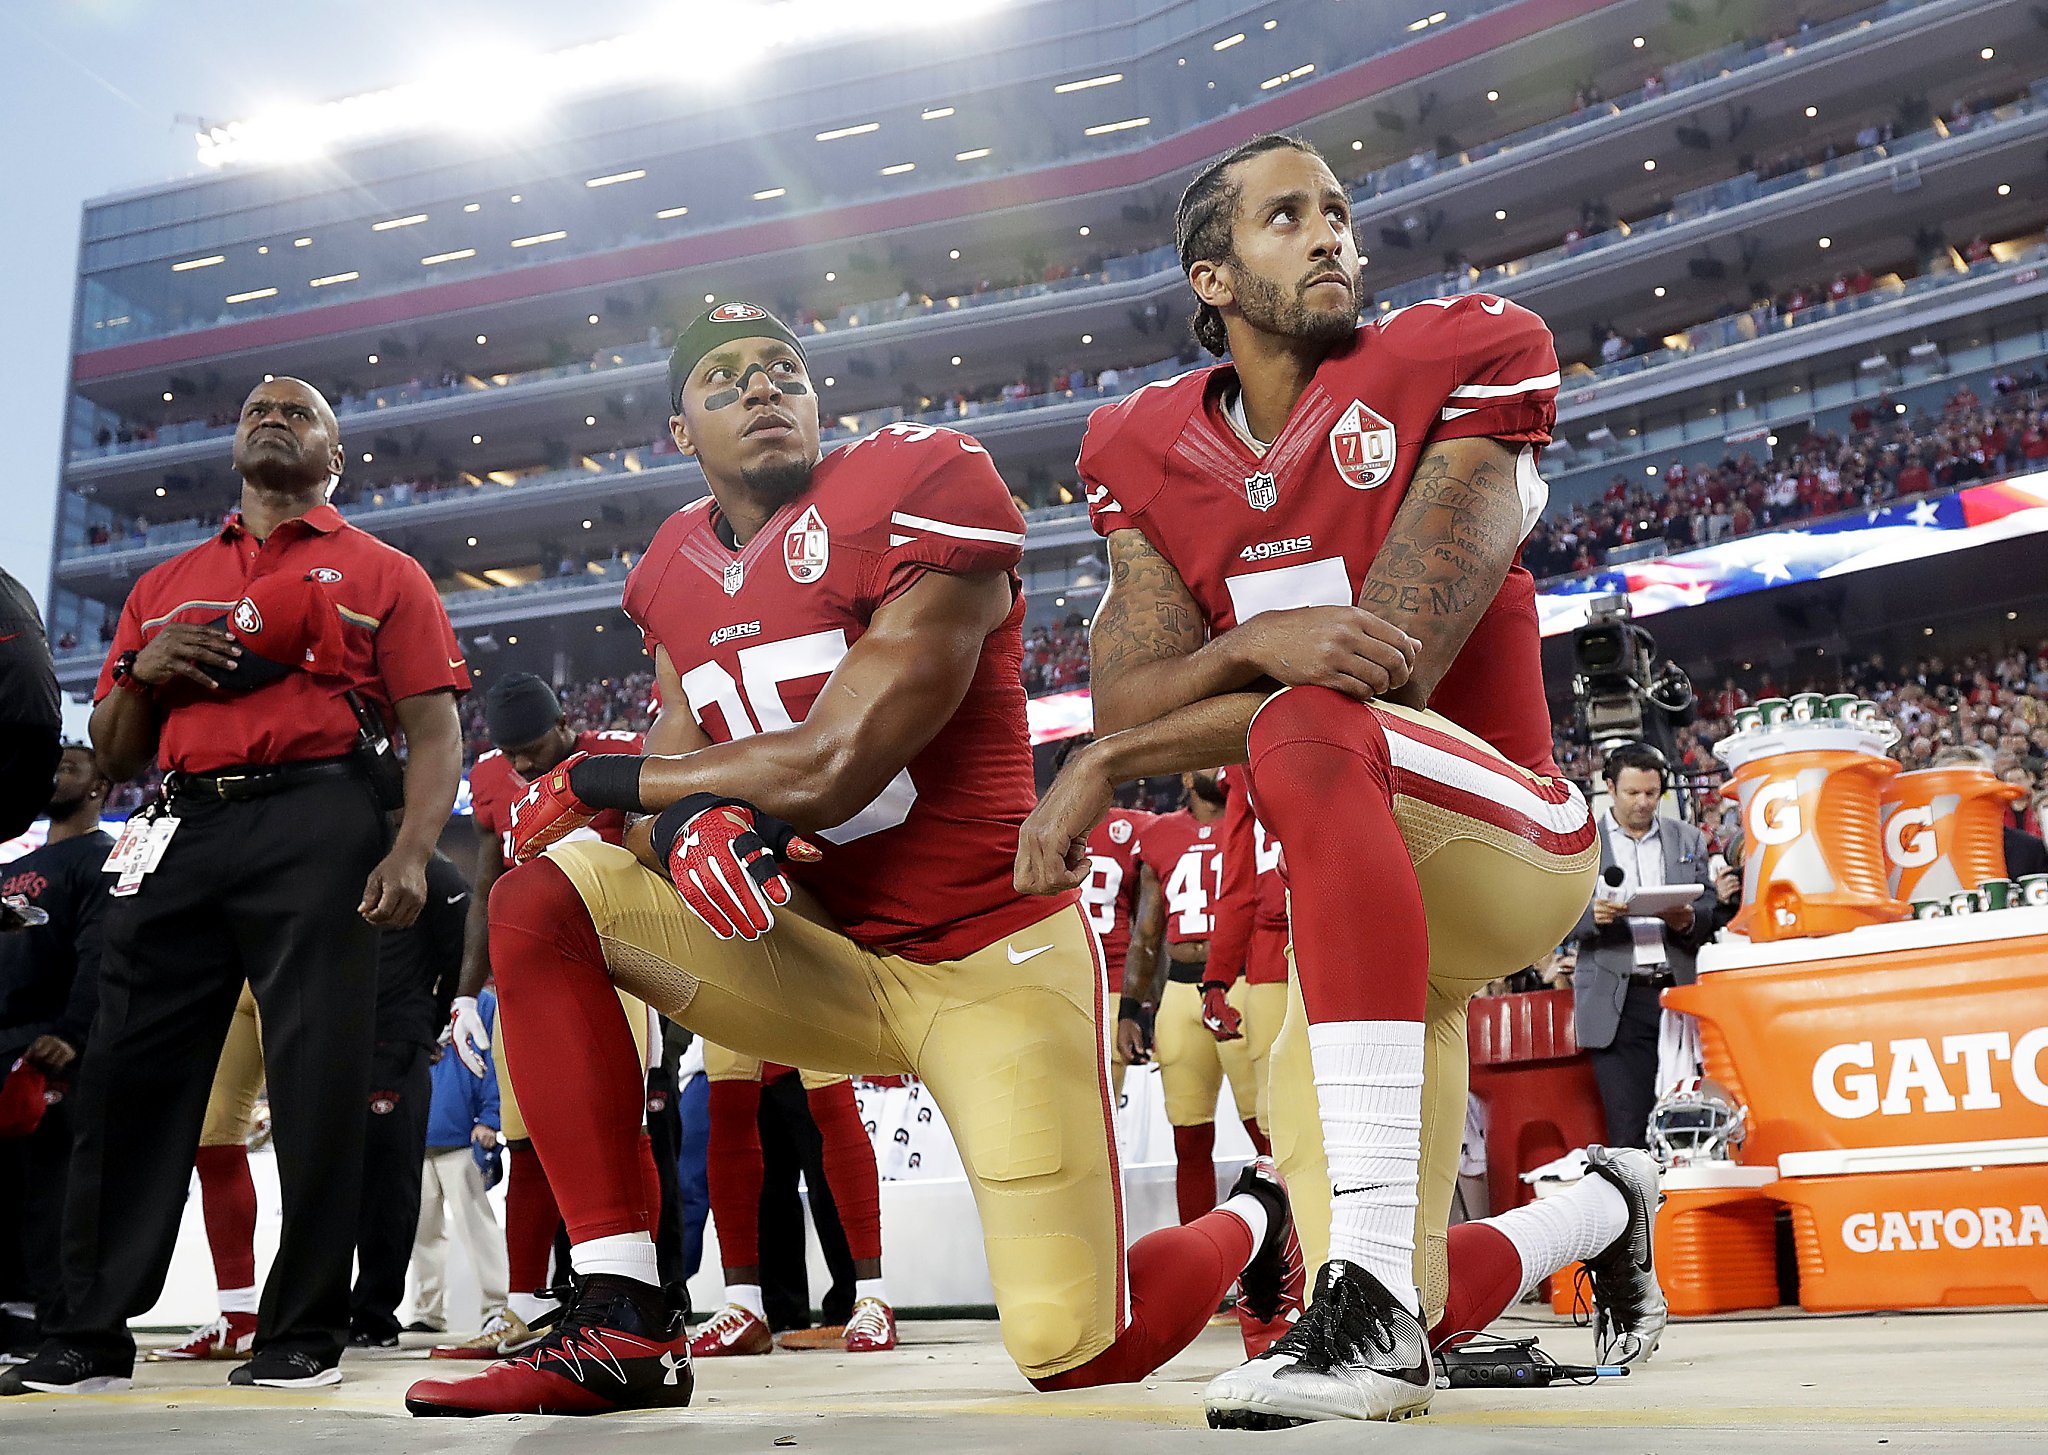 Colin Kaepernick without NFL job: because of performance or protest?